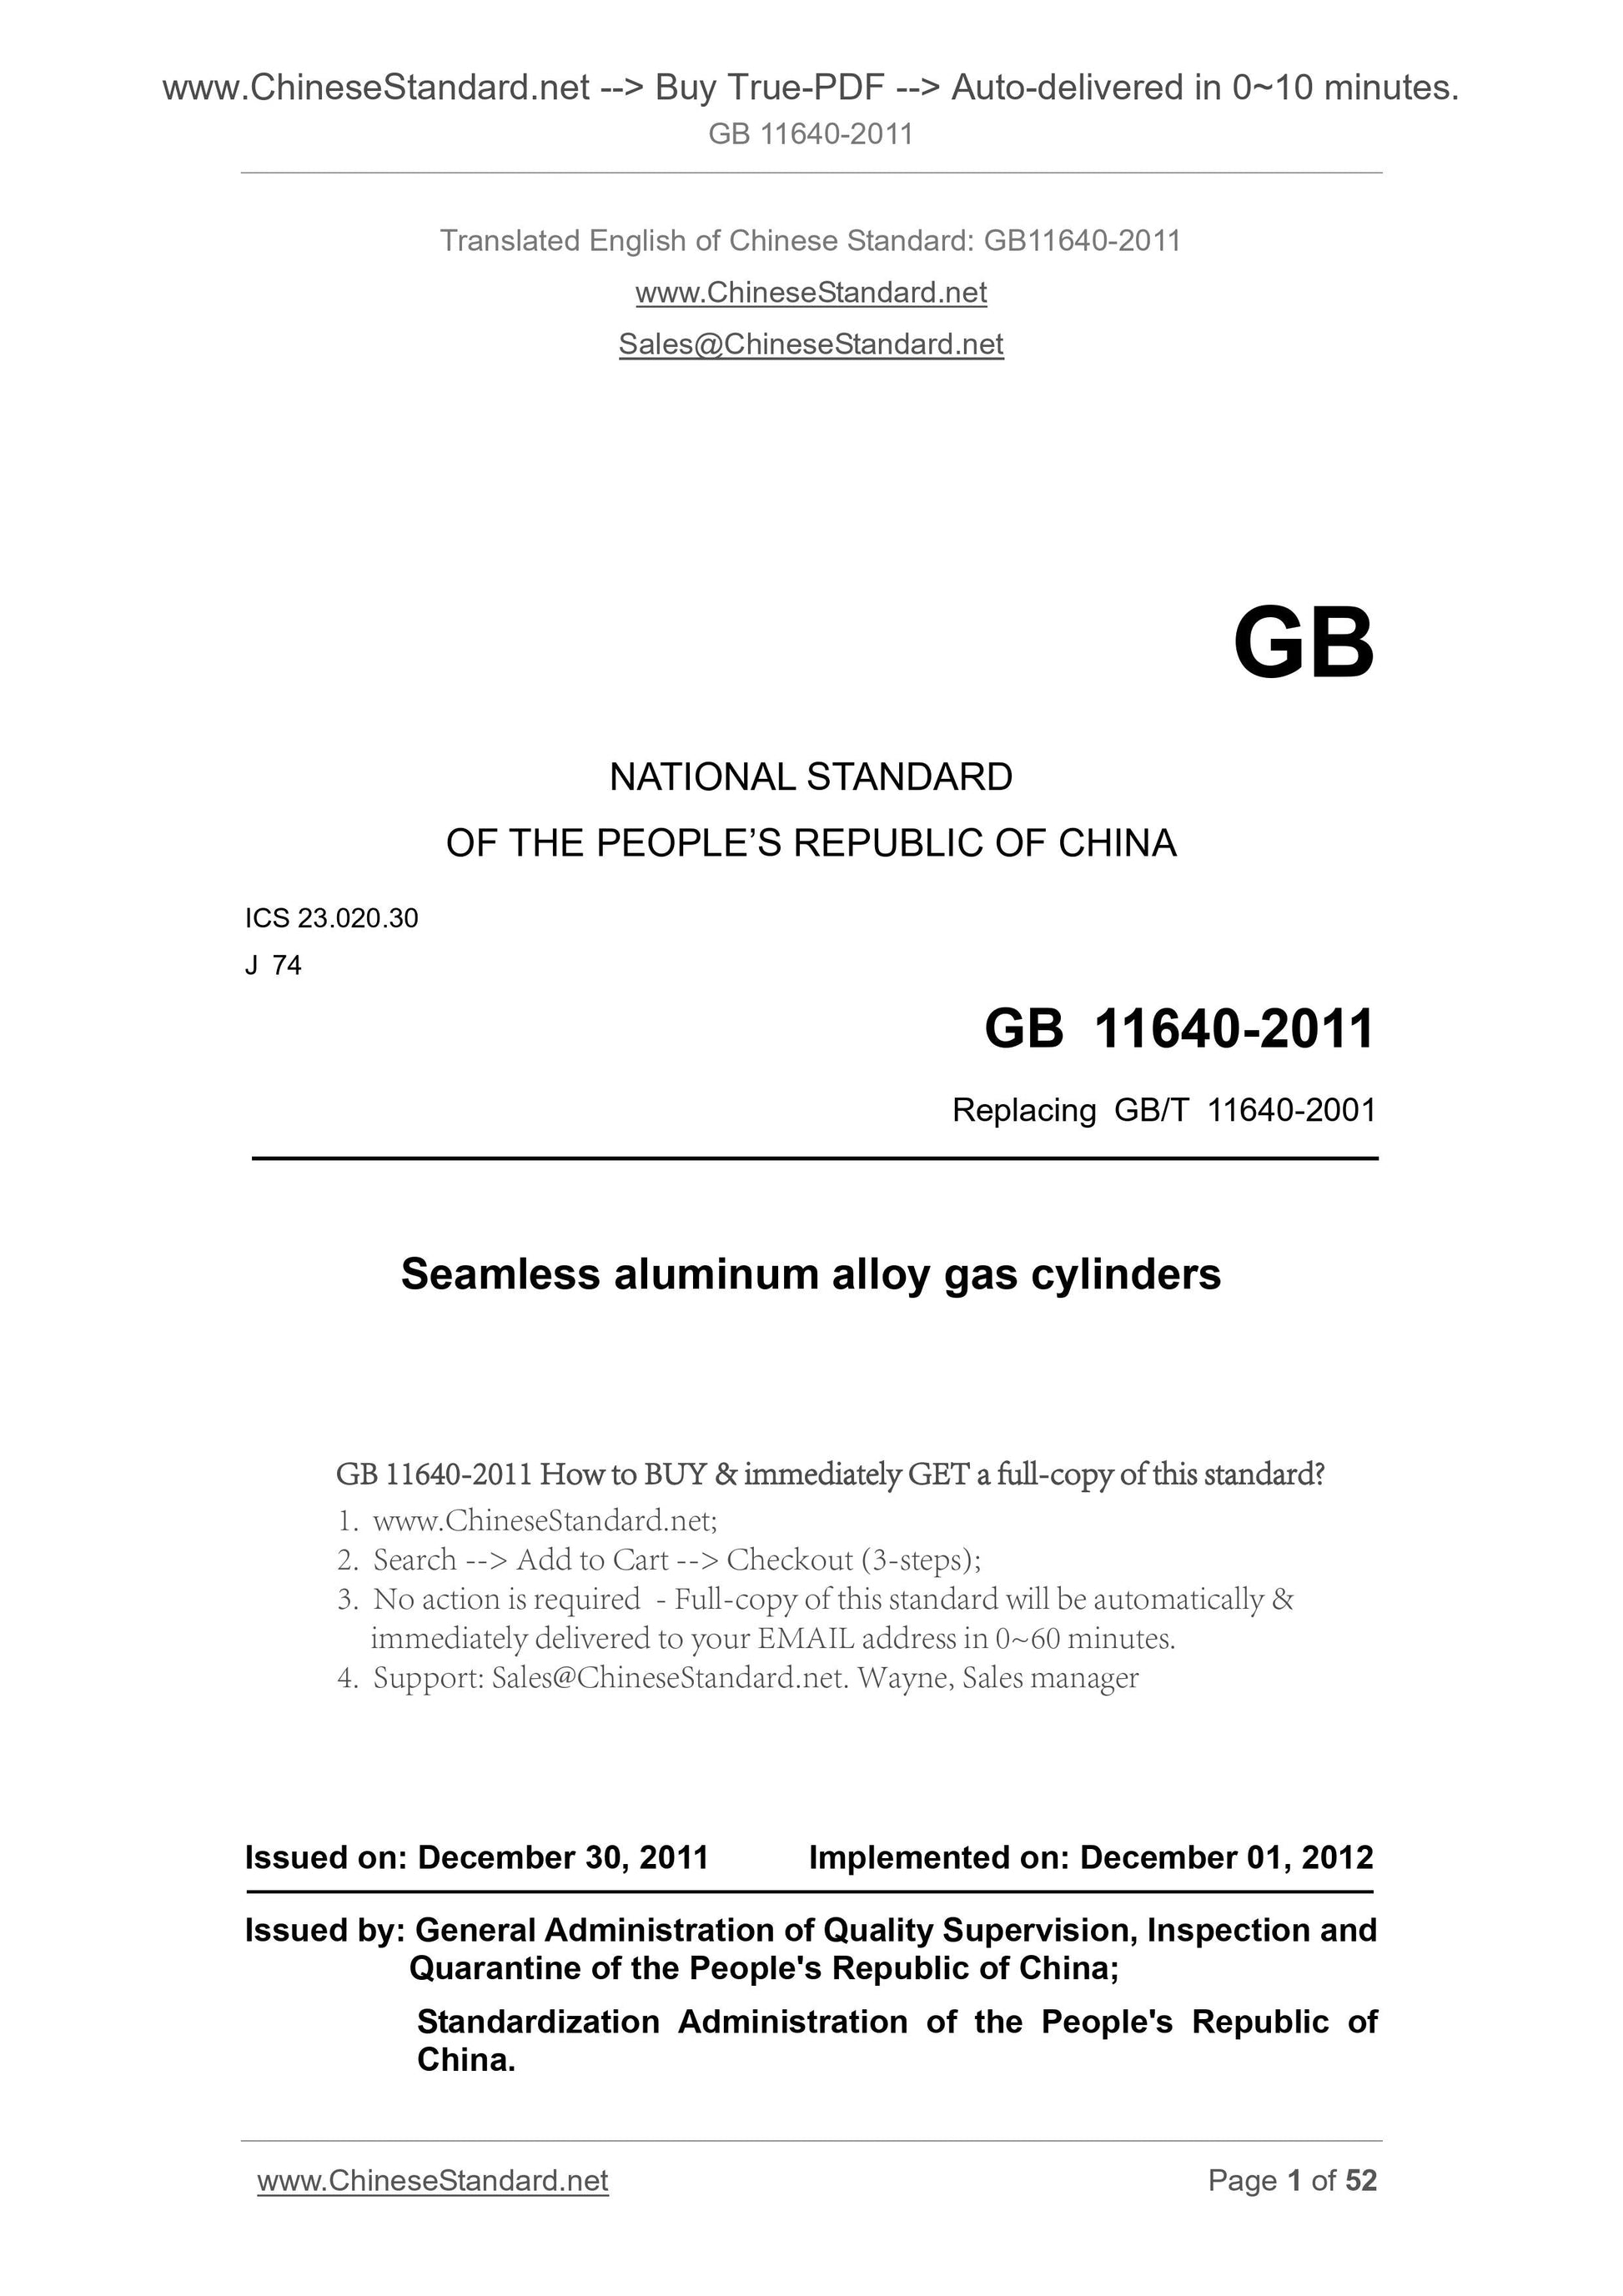 GB 11640-2011 Page 1